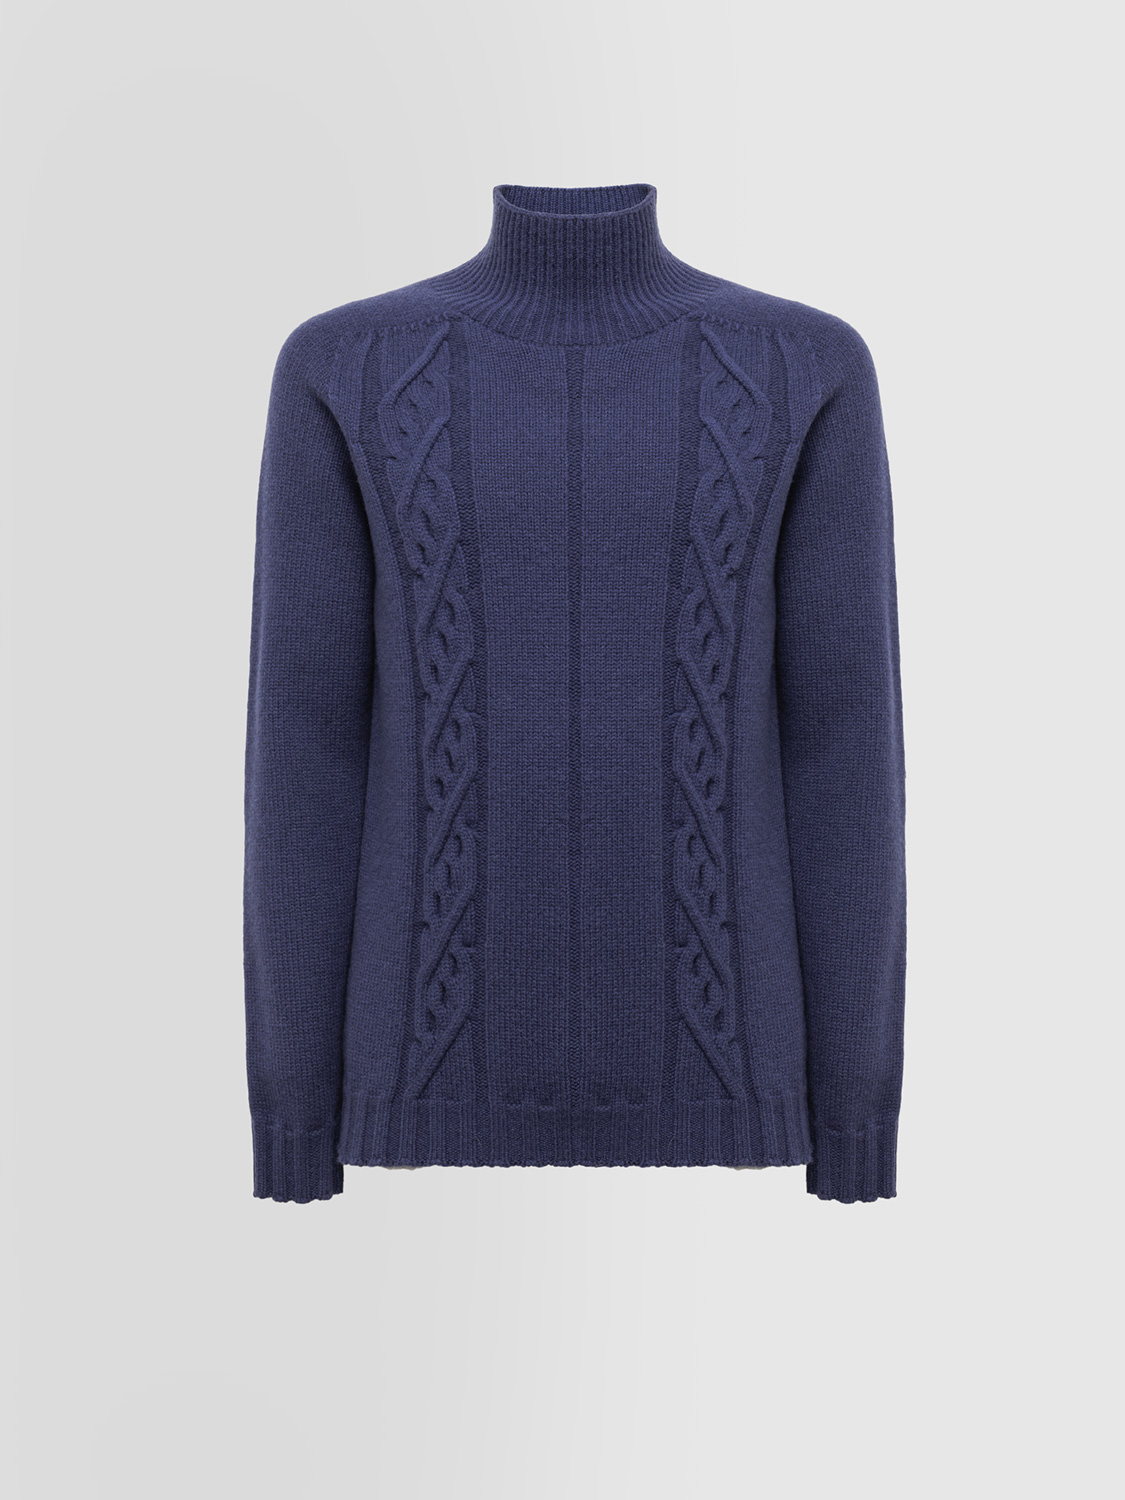 ALPHA STUDIO: COWL NECK SWEATER IN WOOL AND CASHMERE